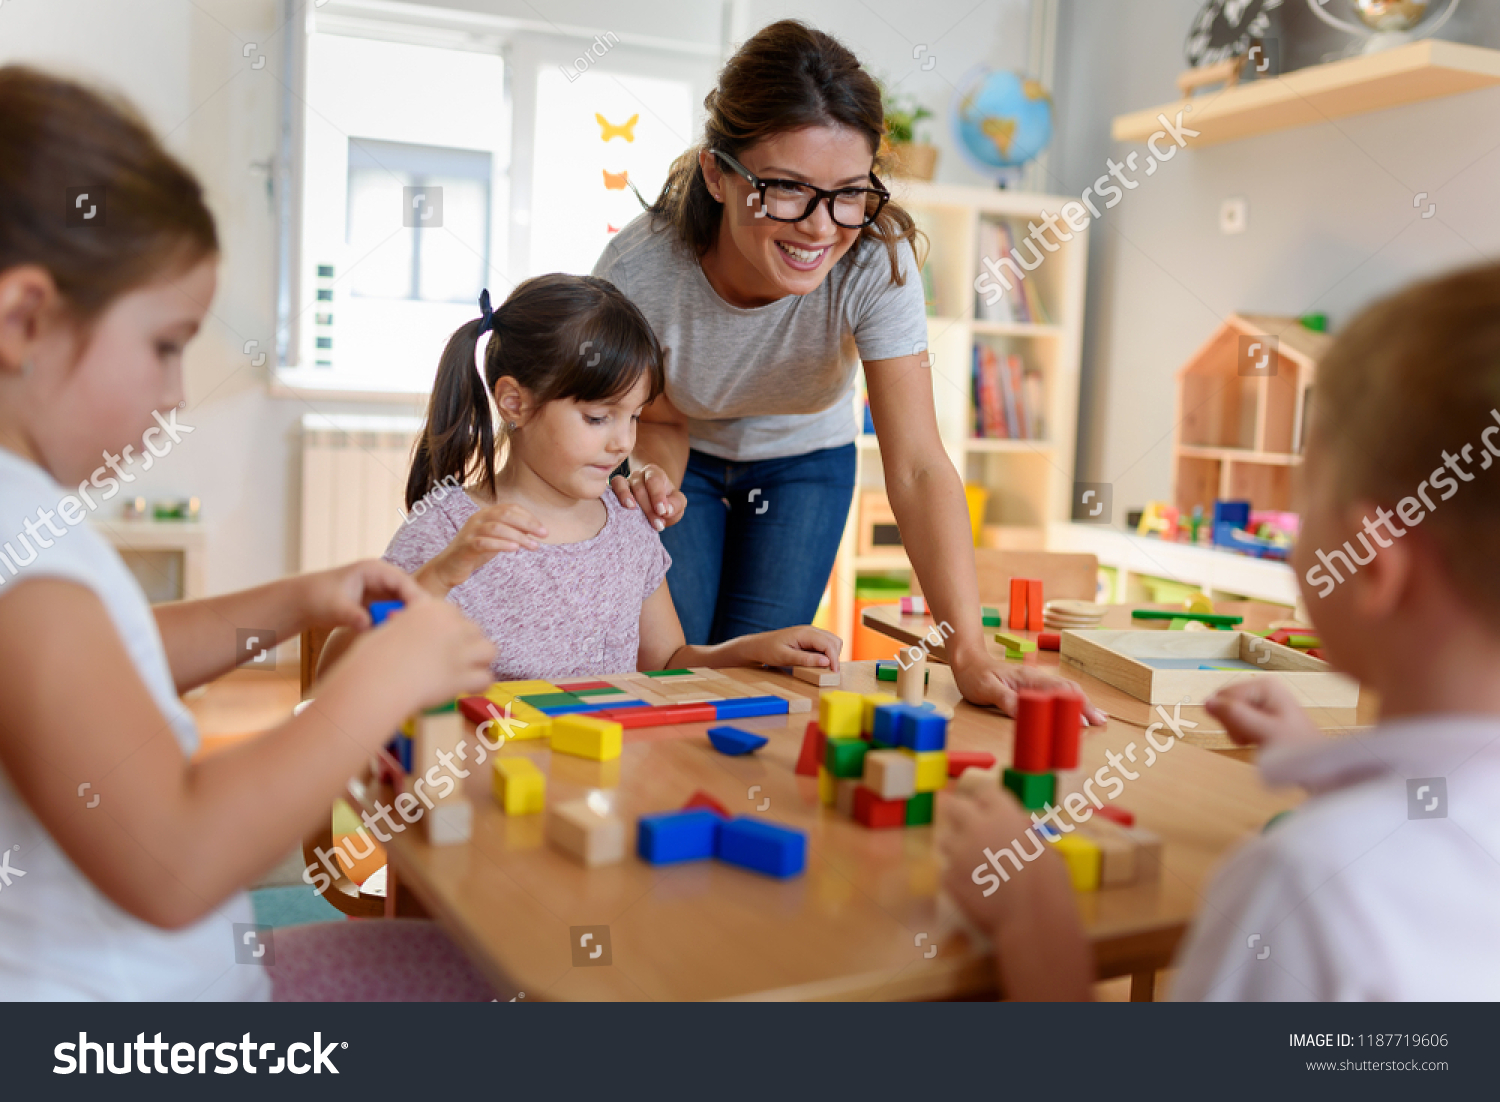 Preschool teacher with children playing with colorful wooden didactic toys at kindergarten #1187719606